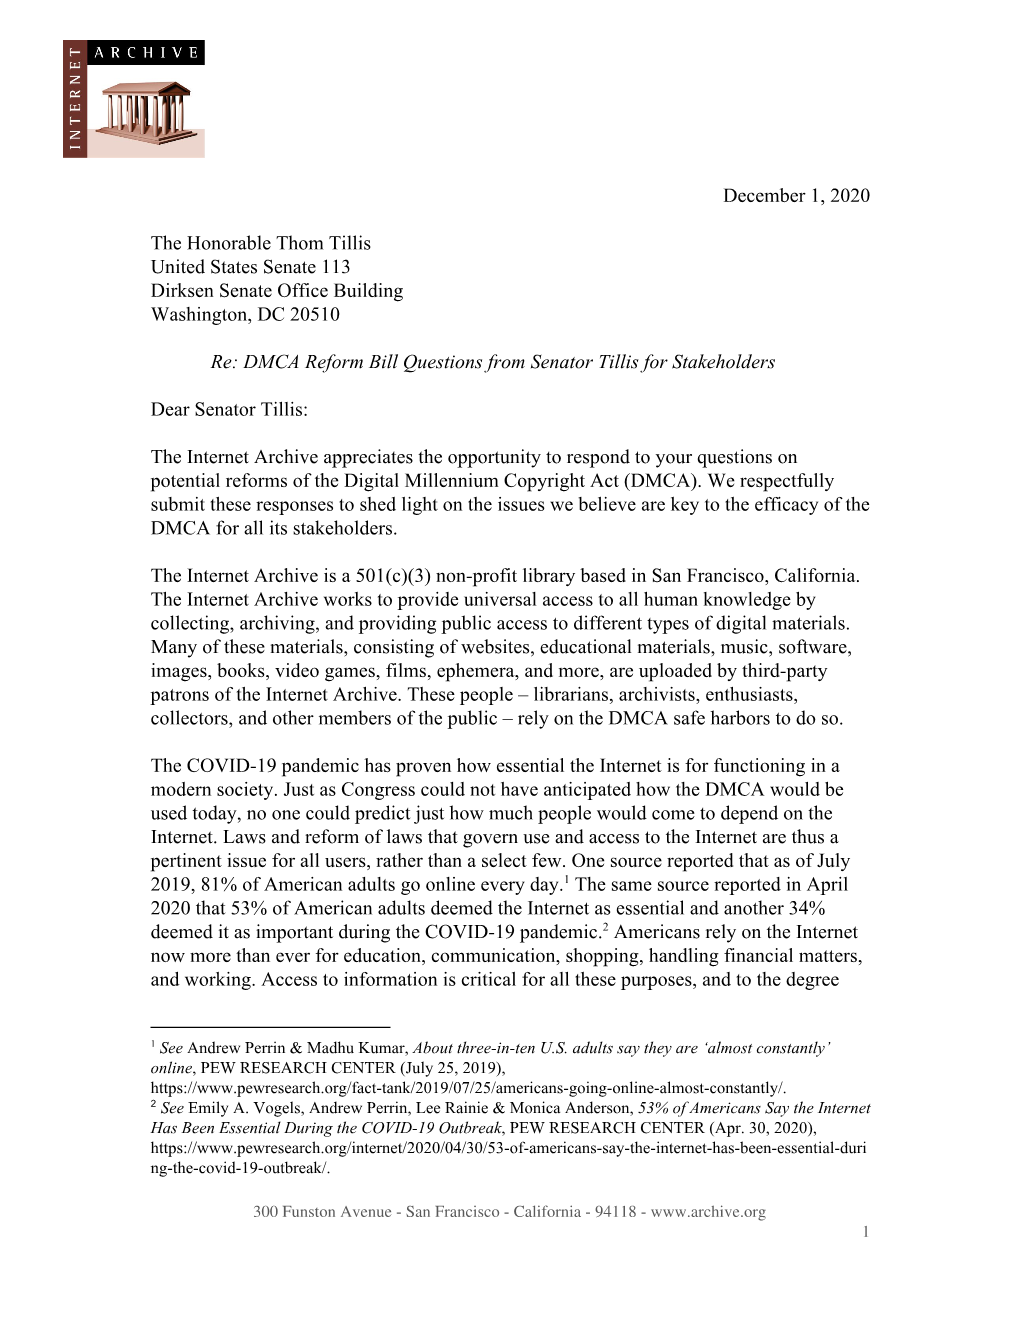 Internet Archive Letter Re: DMCA Reform Bill Questions from Senator